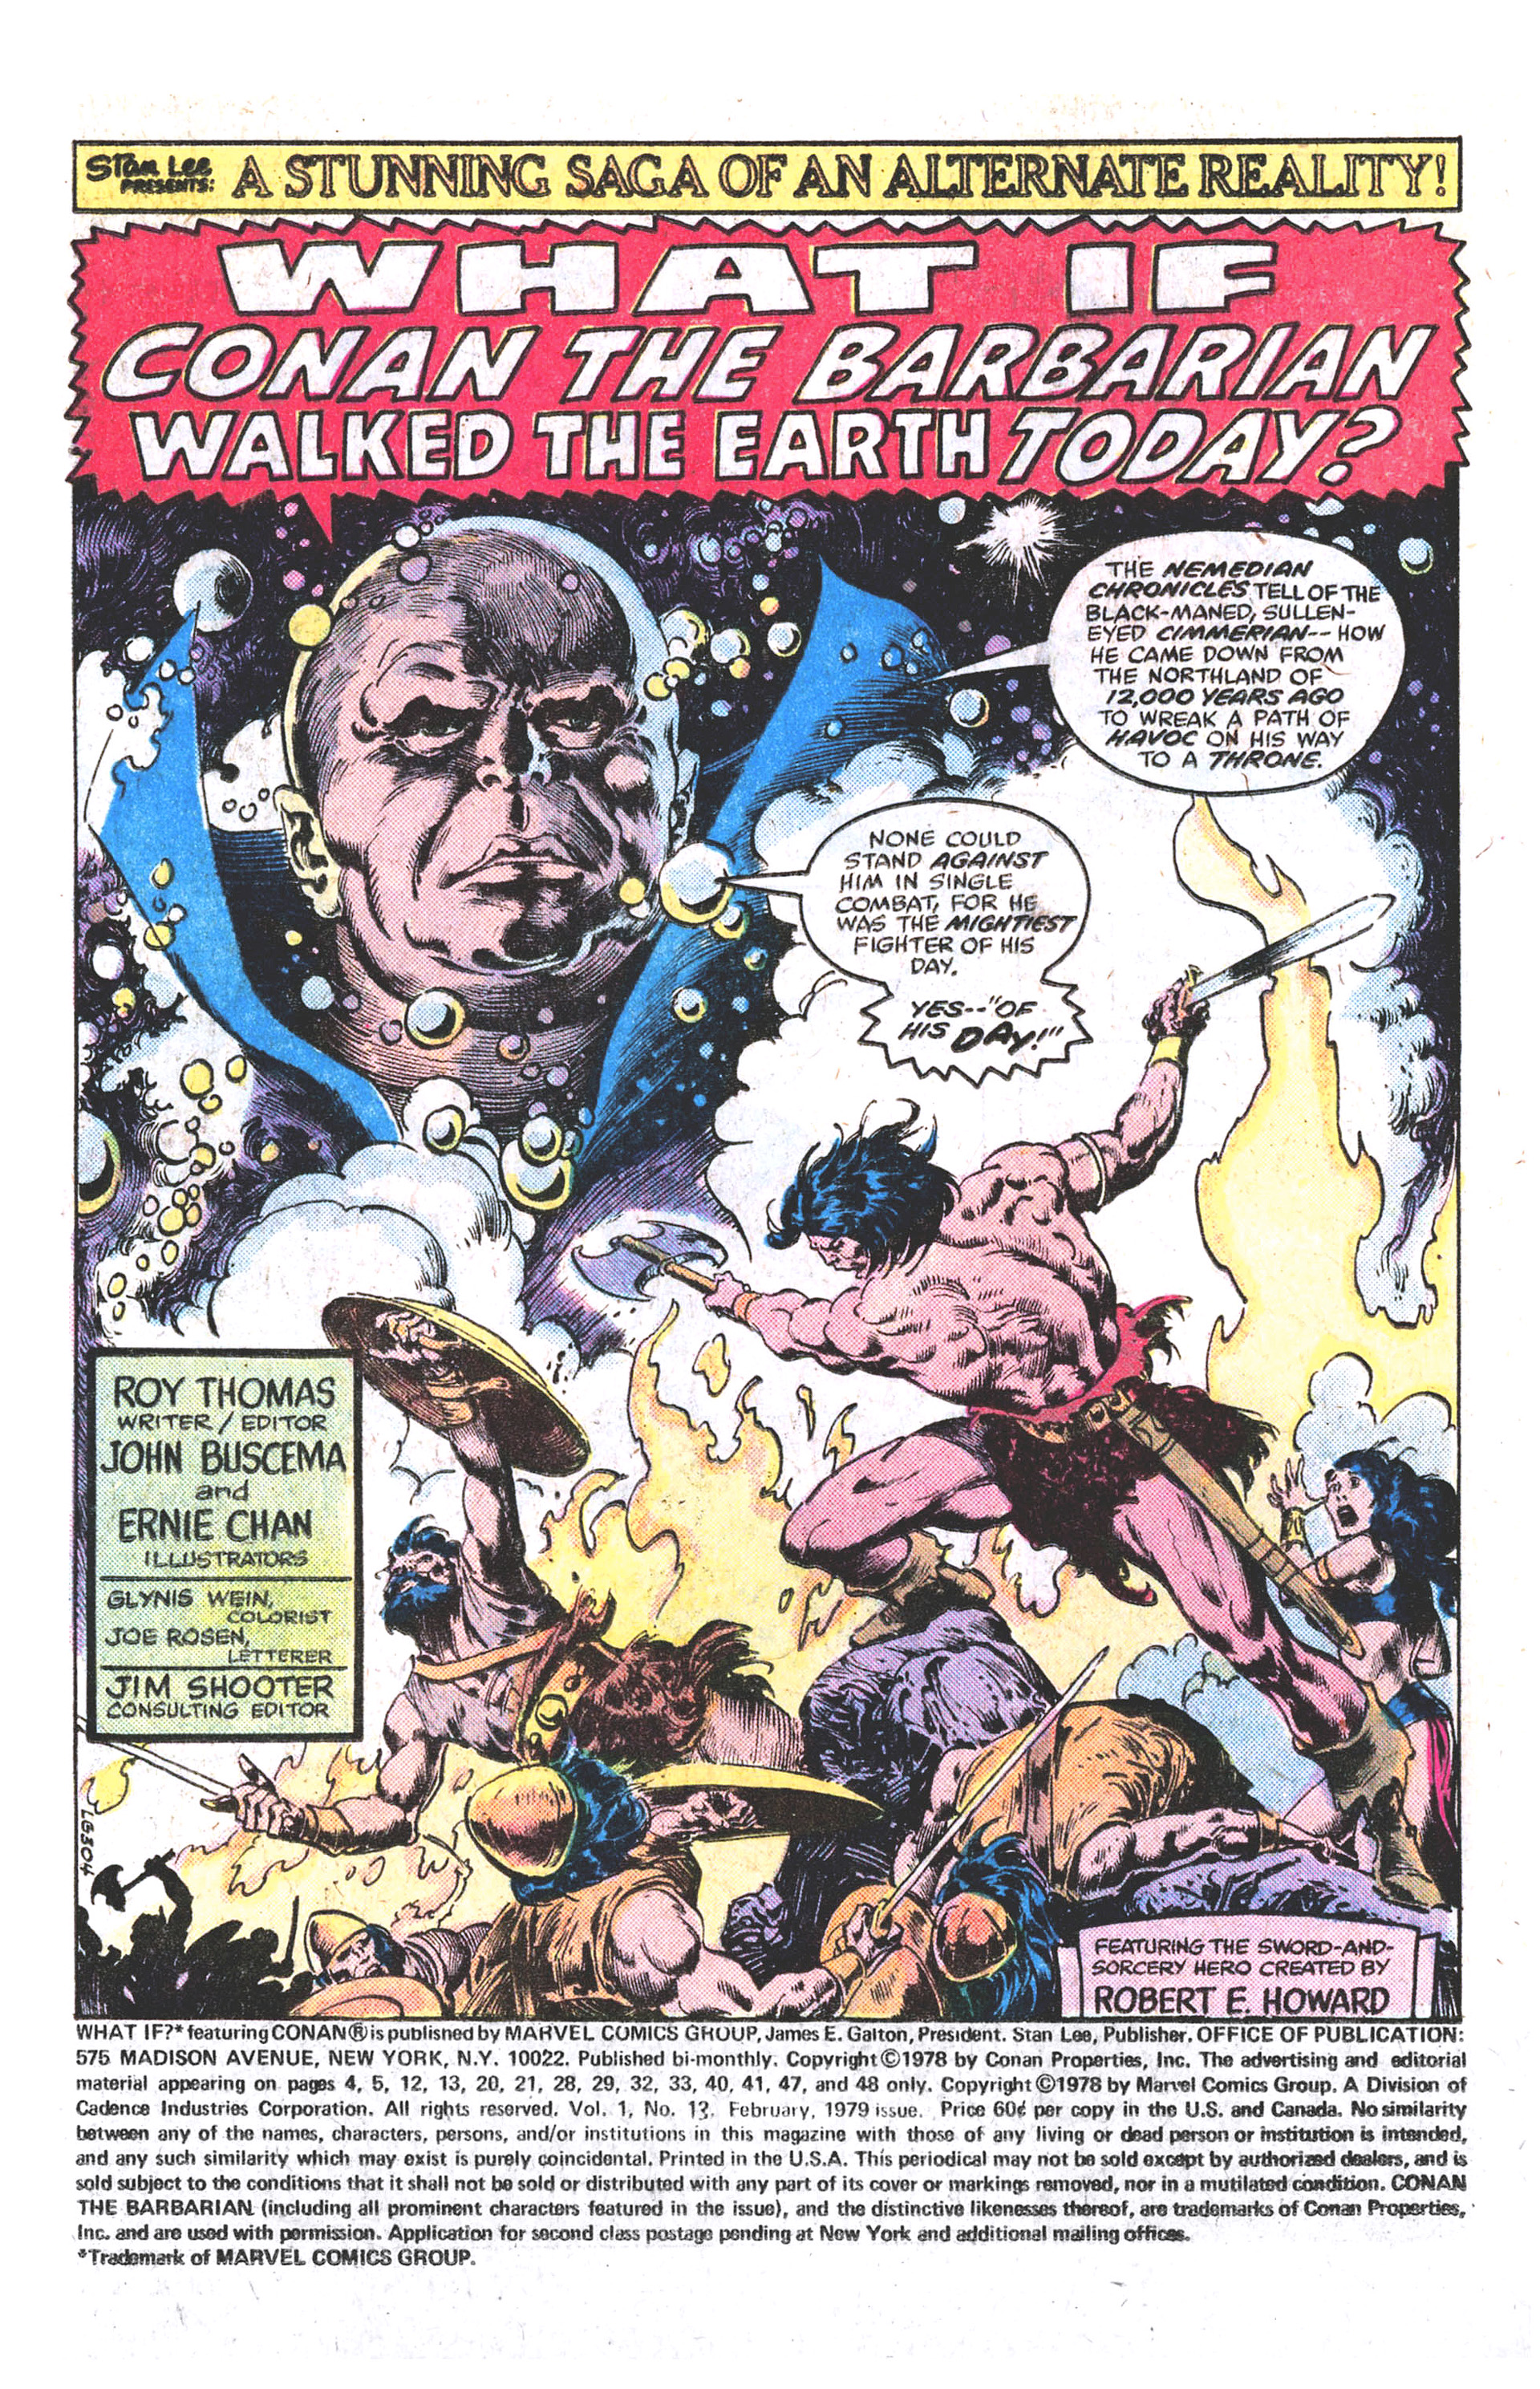 What If? (1977) Issue #13 - Conan The Barbarian walked the Earth Today #13 - English 2